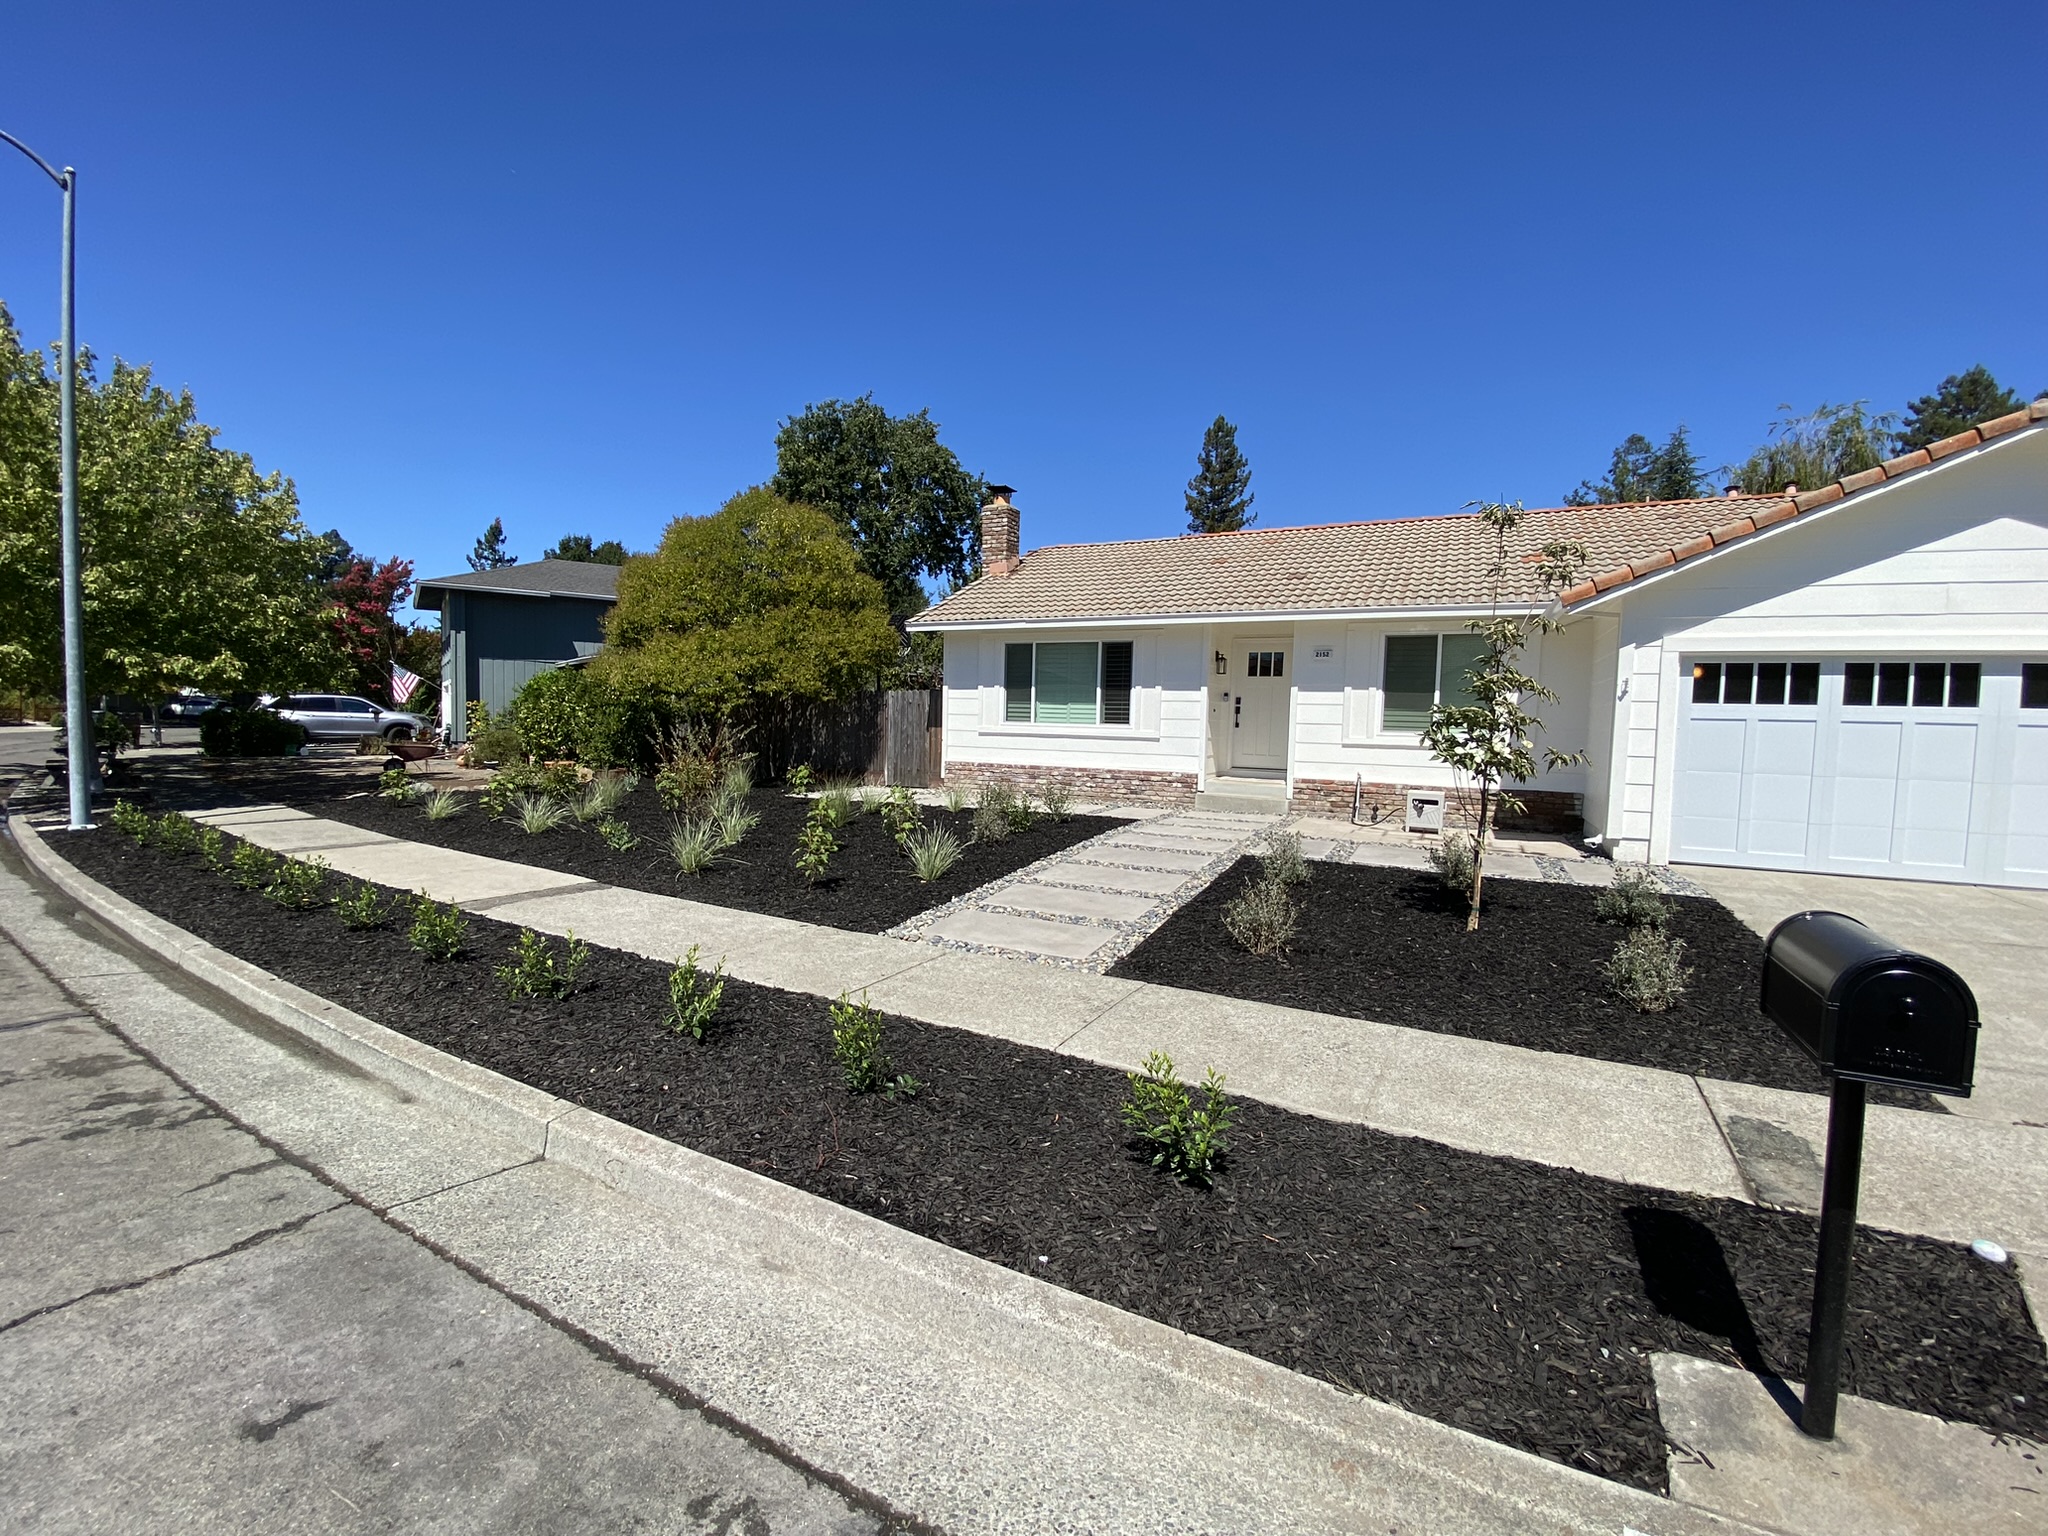 warner-landscape-construction-santa-rosa-ca-after-img-back-yard-patio-and-pathway-gallery